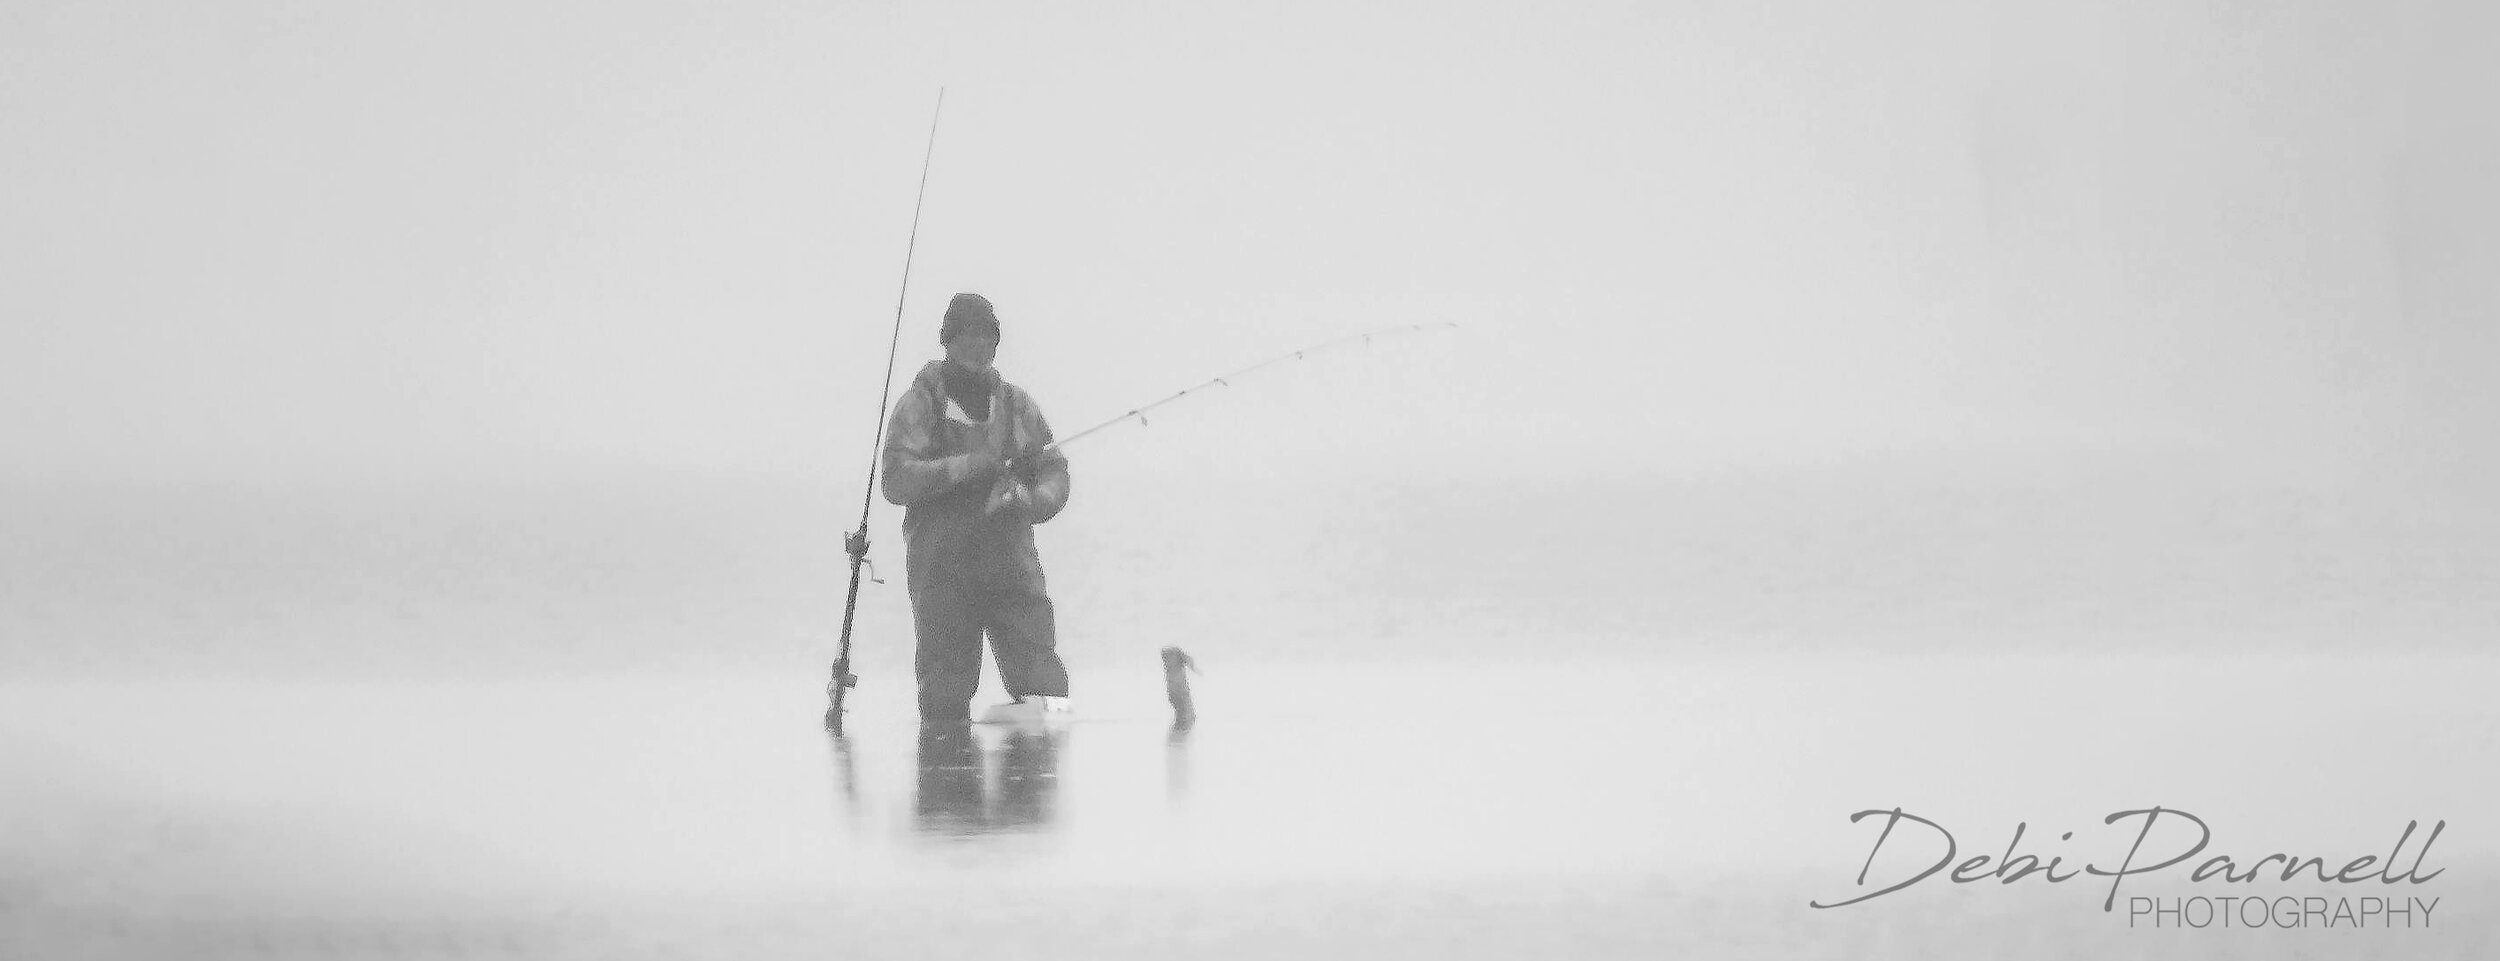 Fishing in the Fog - First Place Marine Photo Power of Photography 2019